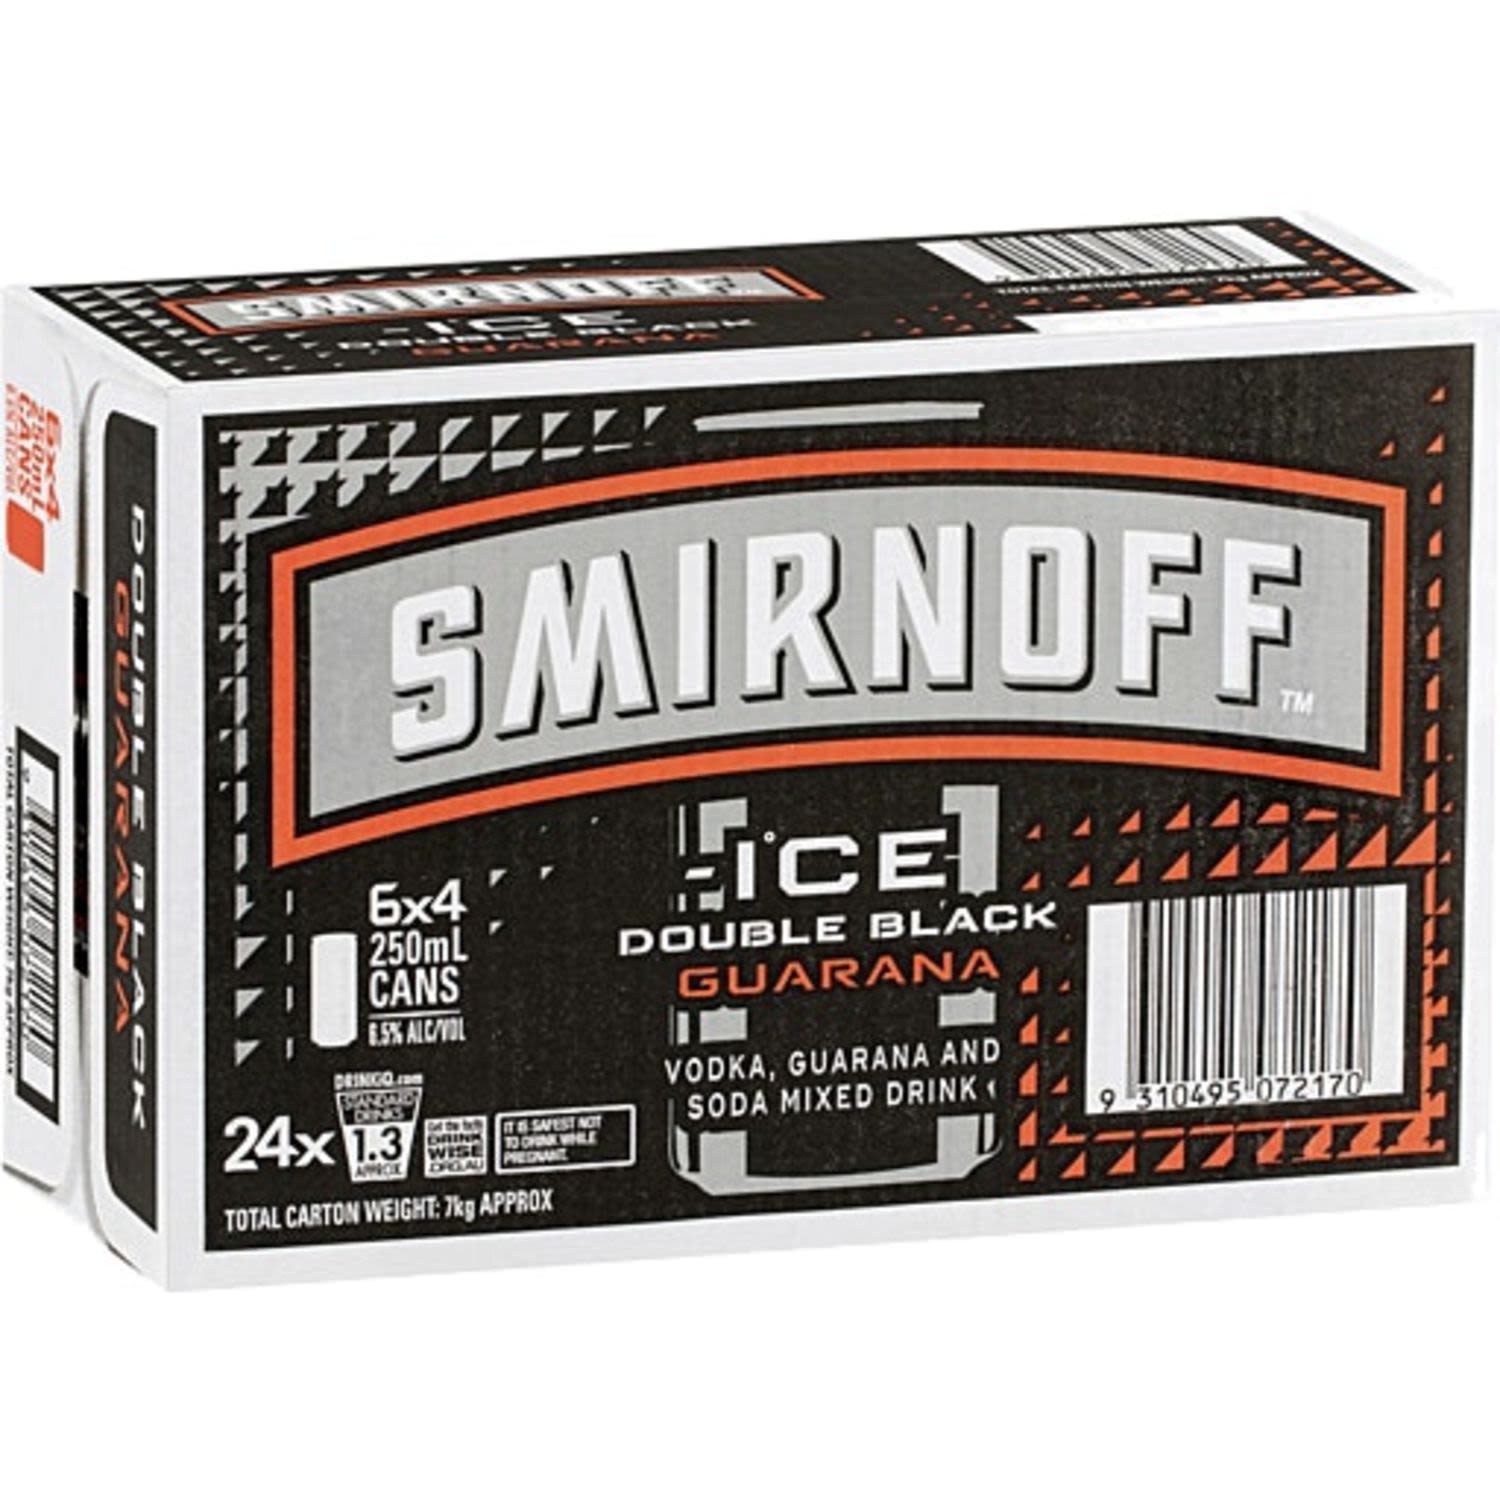 Smirnoff Ice Double Black and Guarana Cans 250mL<br /> <br />Alcohol Volume: 6.50%<br /><br />Pack Format: 24 Pack<br /><br />Standard Drinks: 1.3</br /><br />Pack Type: Can<br />